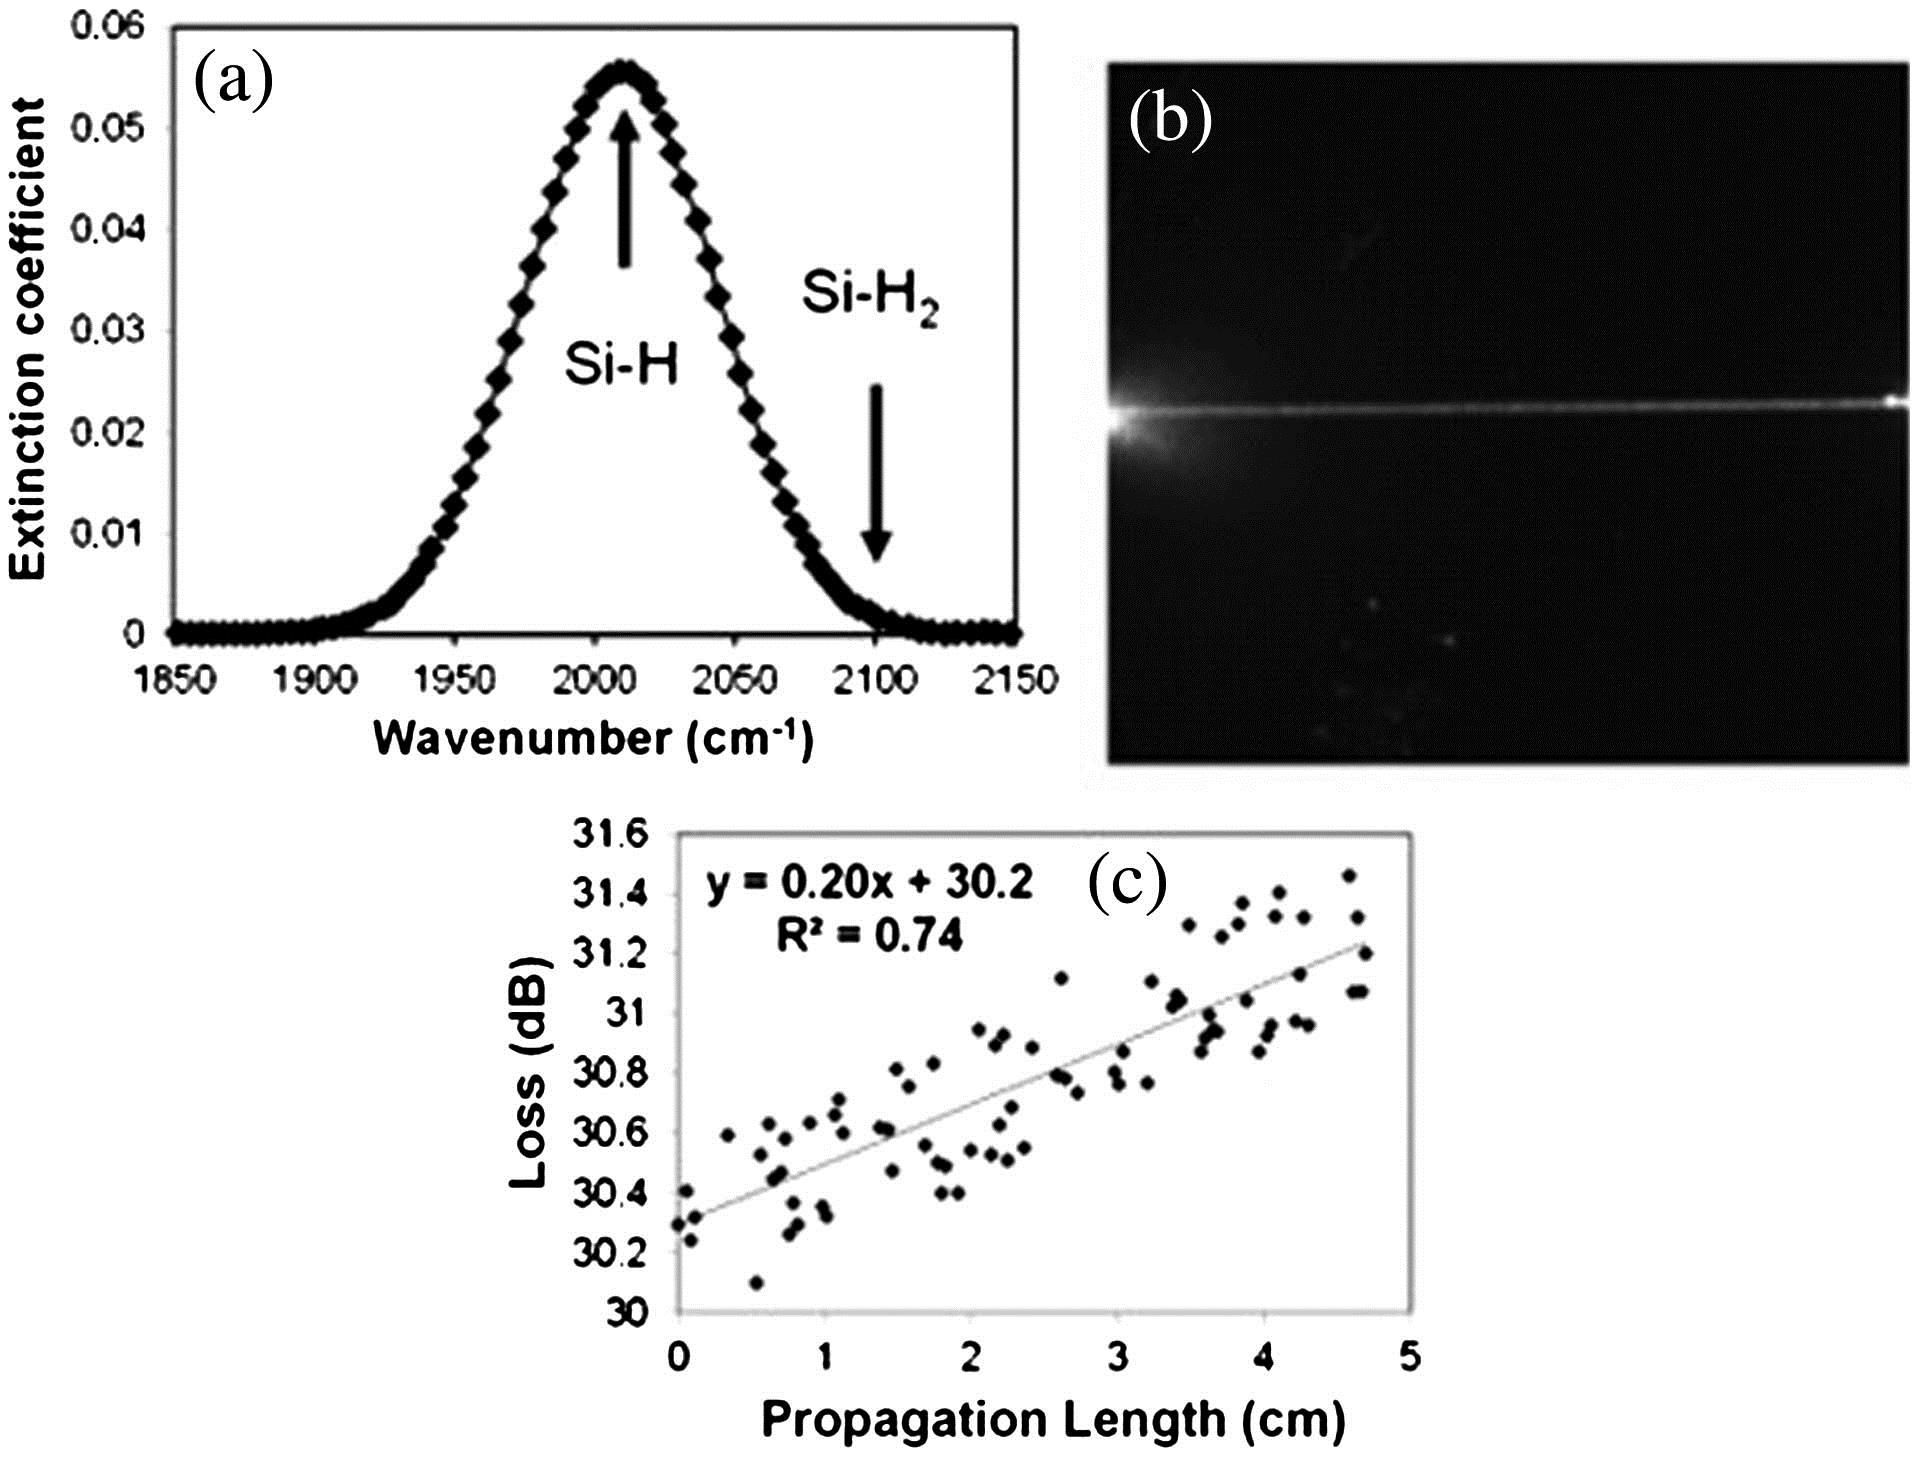 Characterization of the material properties. (a) The FTIR spectrum. (b) The IR camera image of loss streak from a 200 nm a-Si:H wafer. (c) The data extracted from this image fitted with a linear decay.